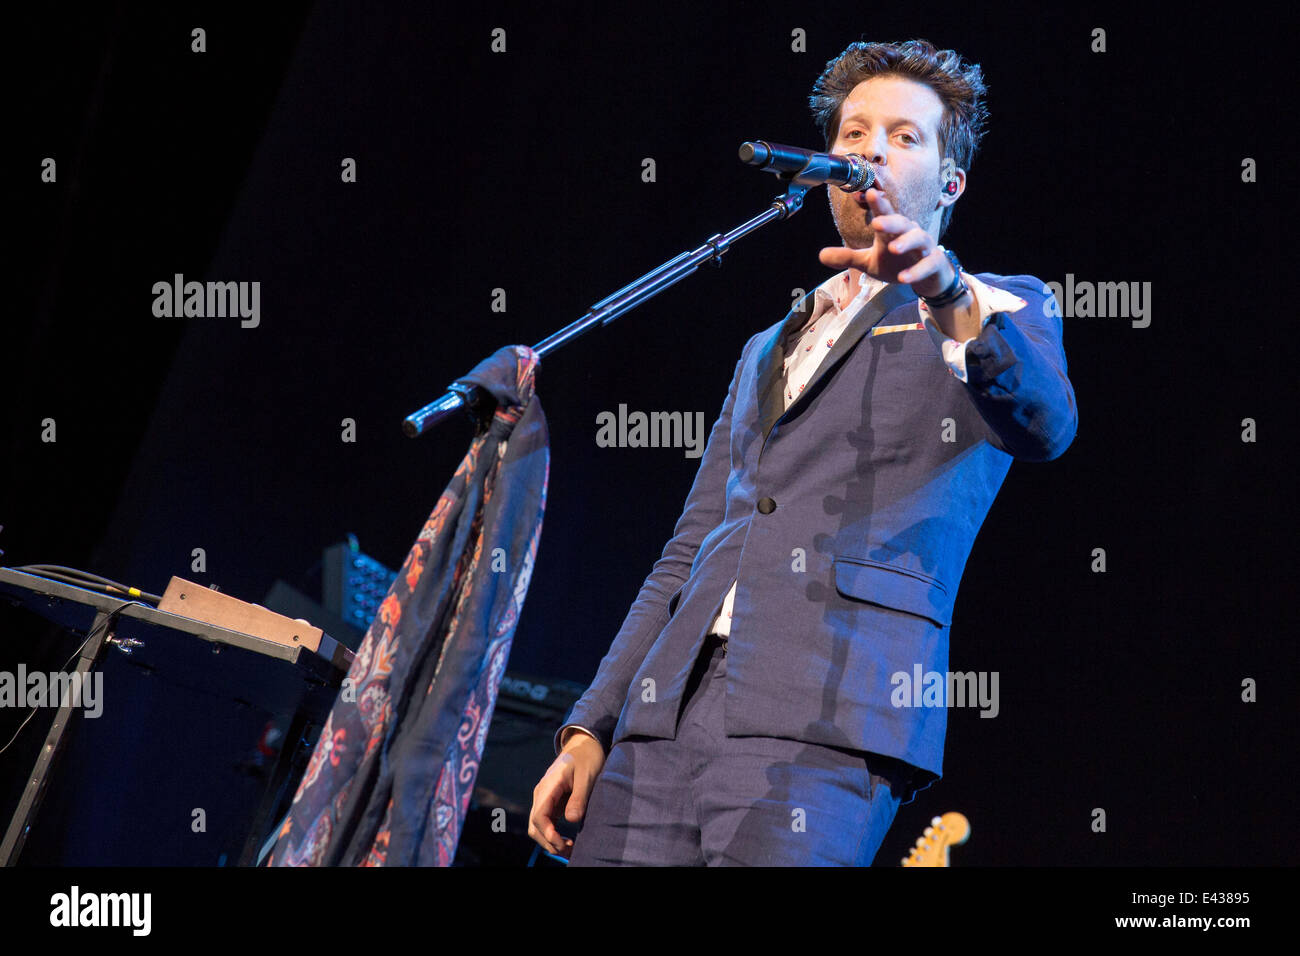 July 1, 2014 - Milwaukee, Wisconsin, U.S - MAYER HAWTHORNE (aka ANDREW MAYER COHEN) performs live at the 2014 Summerfest Music Festival in Milwaukee Wisconsin (Credit Image: © Daniel DeSlover/ZUMA Wire) Stock Photo